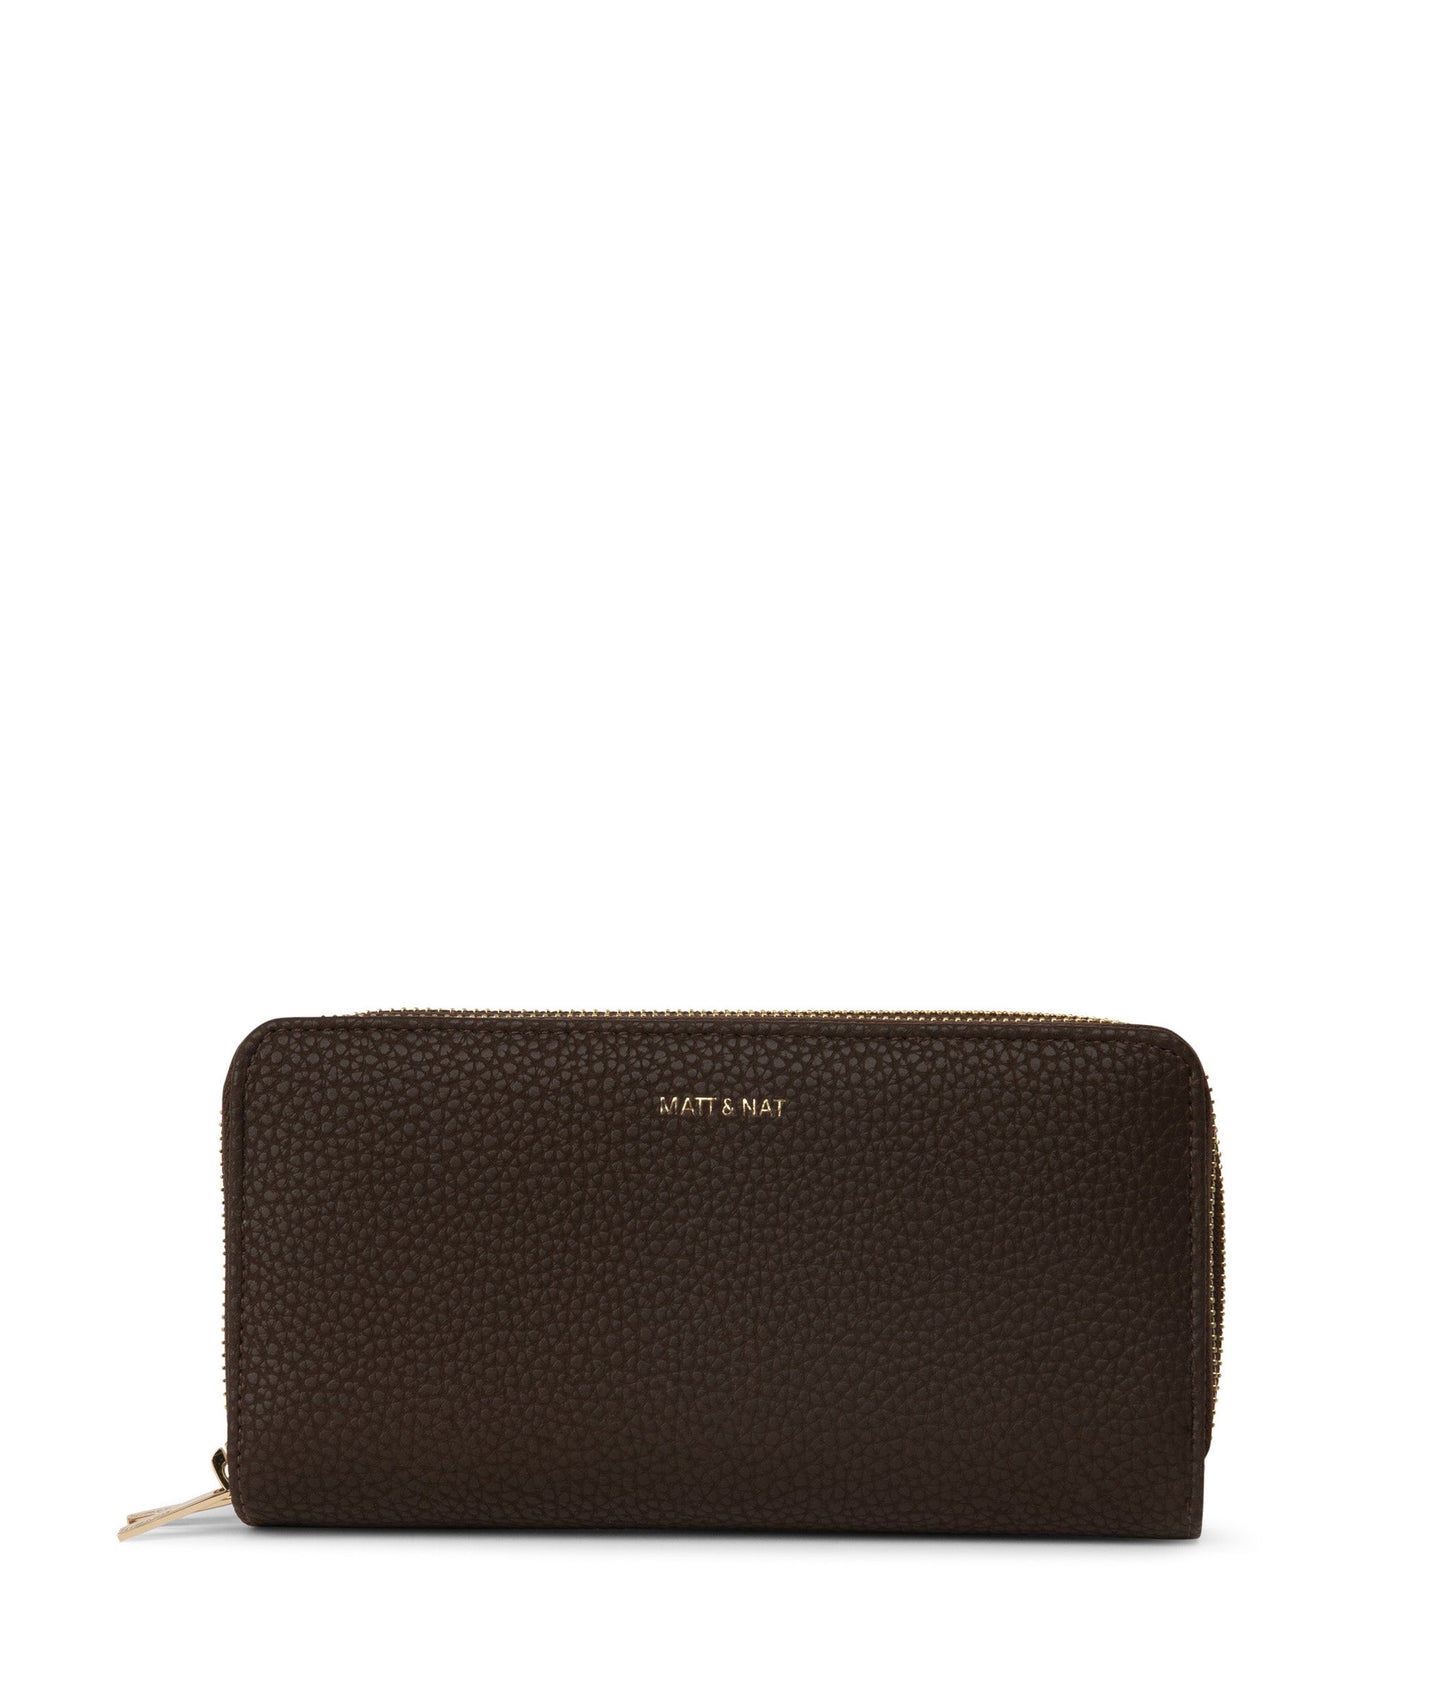 SUBLIME Vegan Wallet - Purity | Color: Brown - variant::truffle